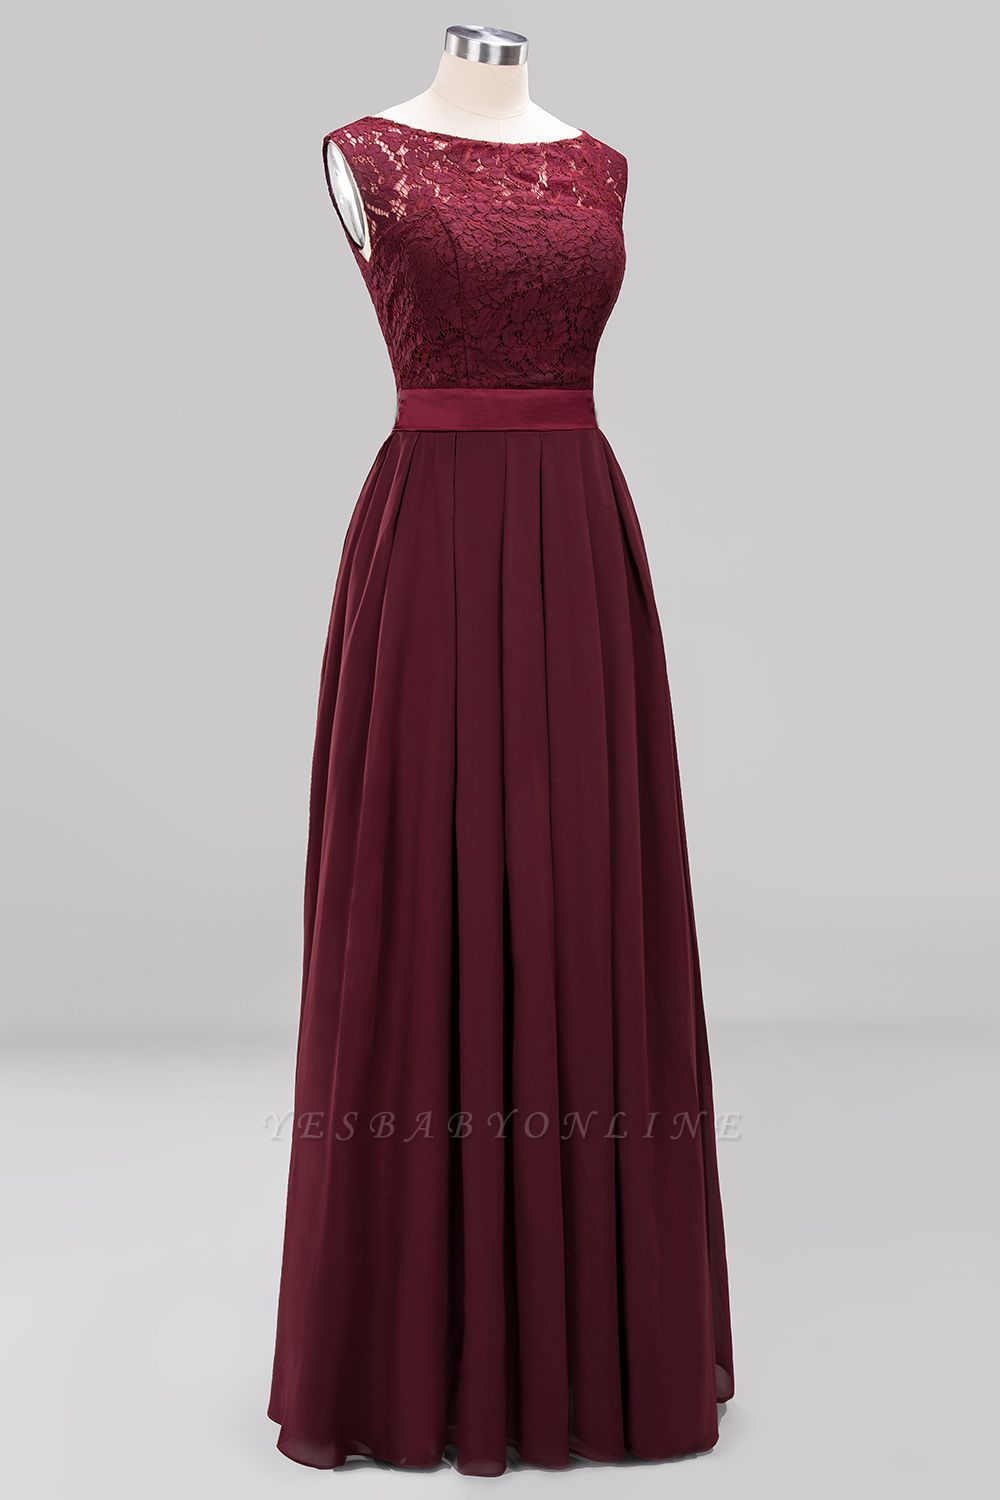 Simple A-Line Chiffon Bridesmaid Dresses | Scoop Sleeveless Lace ...